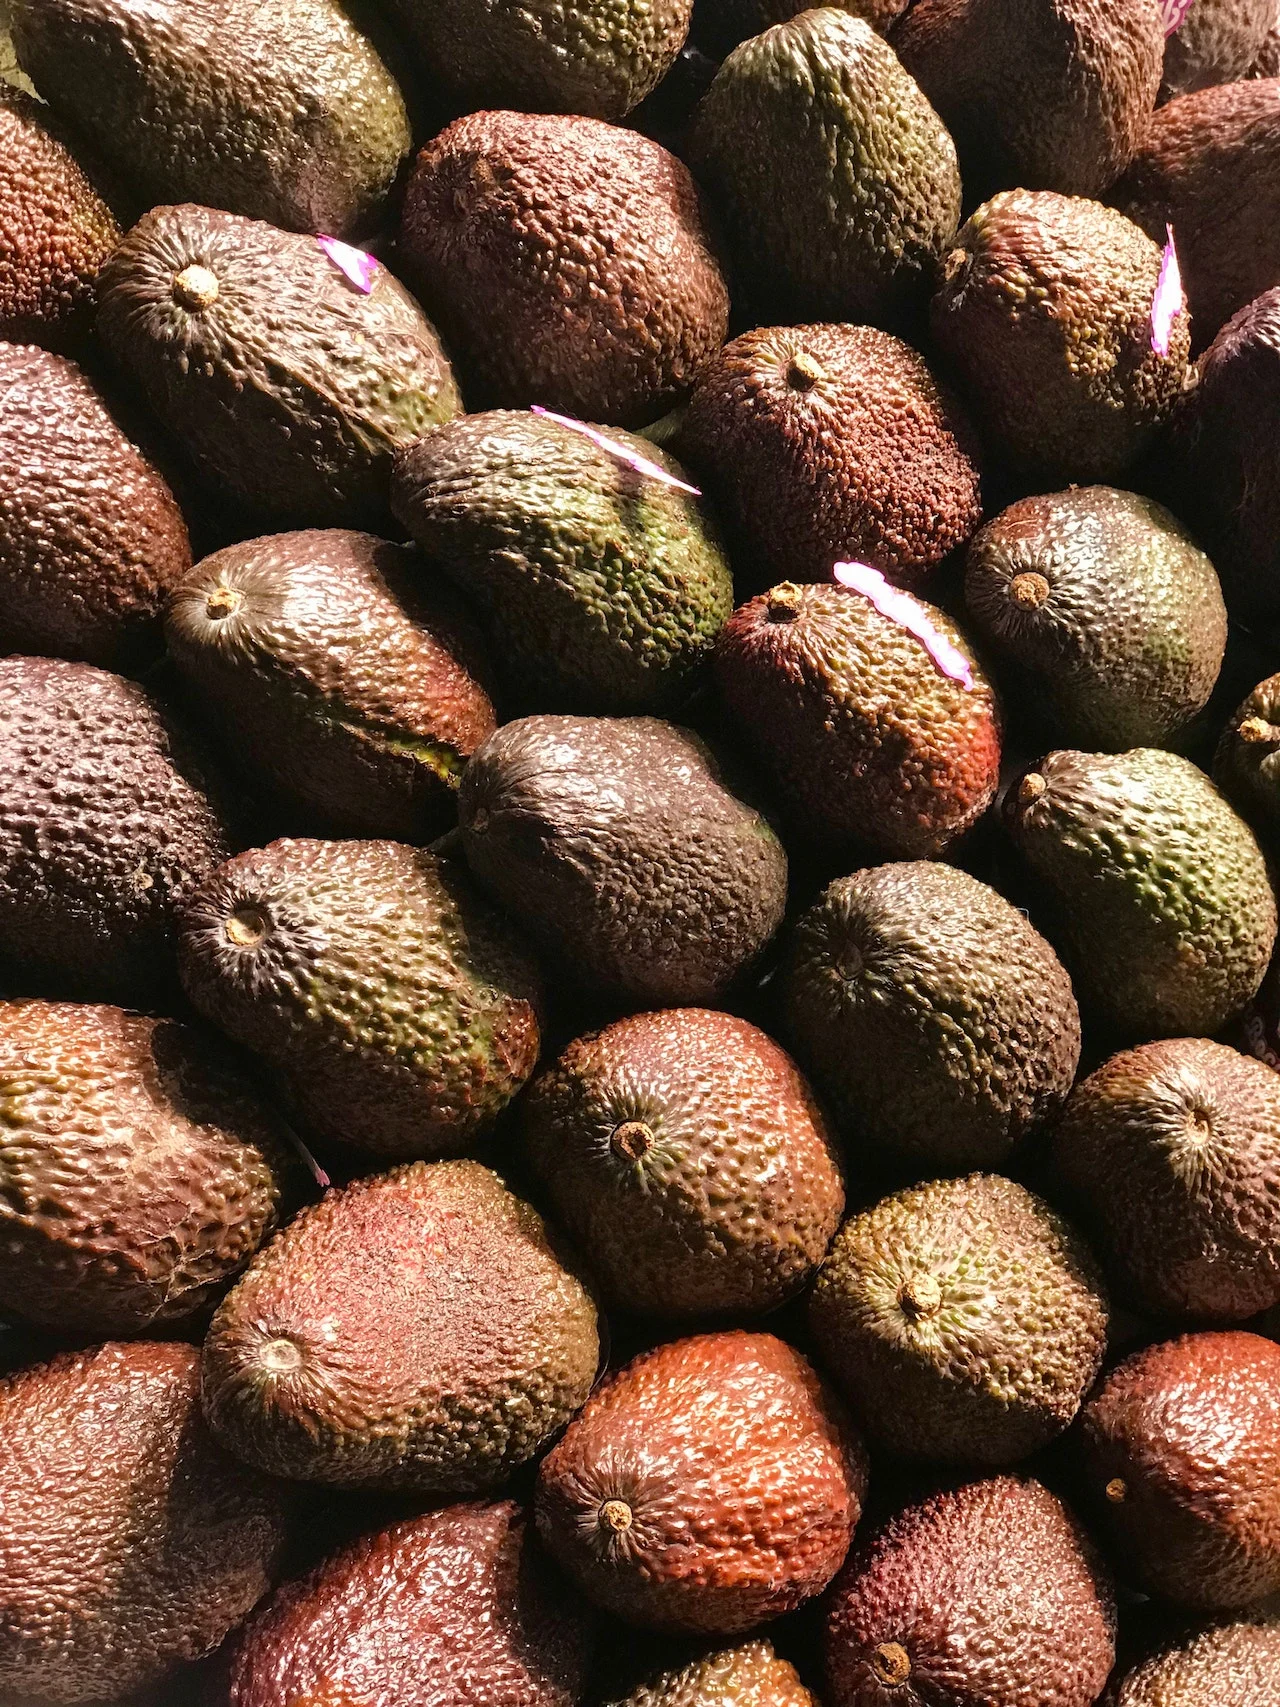 brown-skinned hass avocados filling the frame.